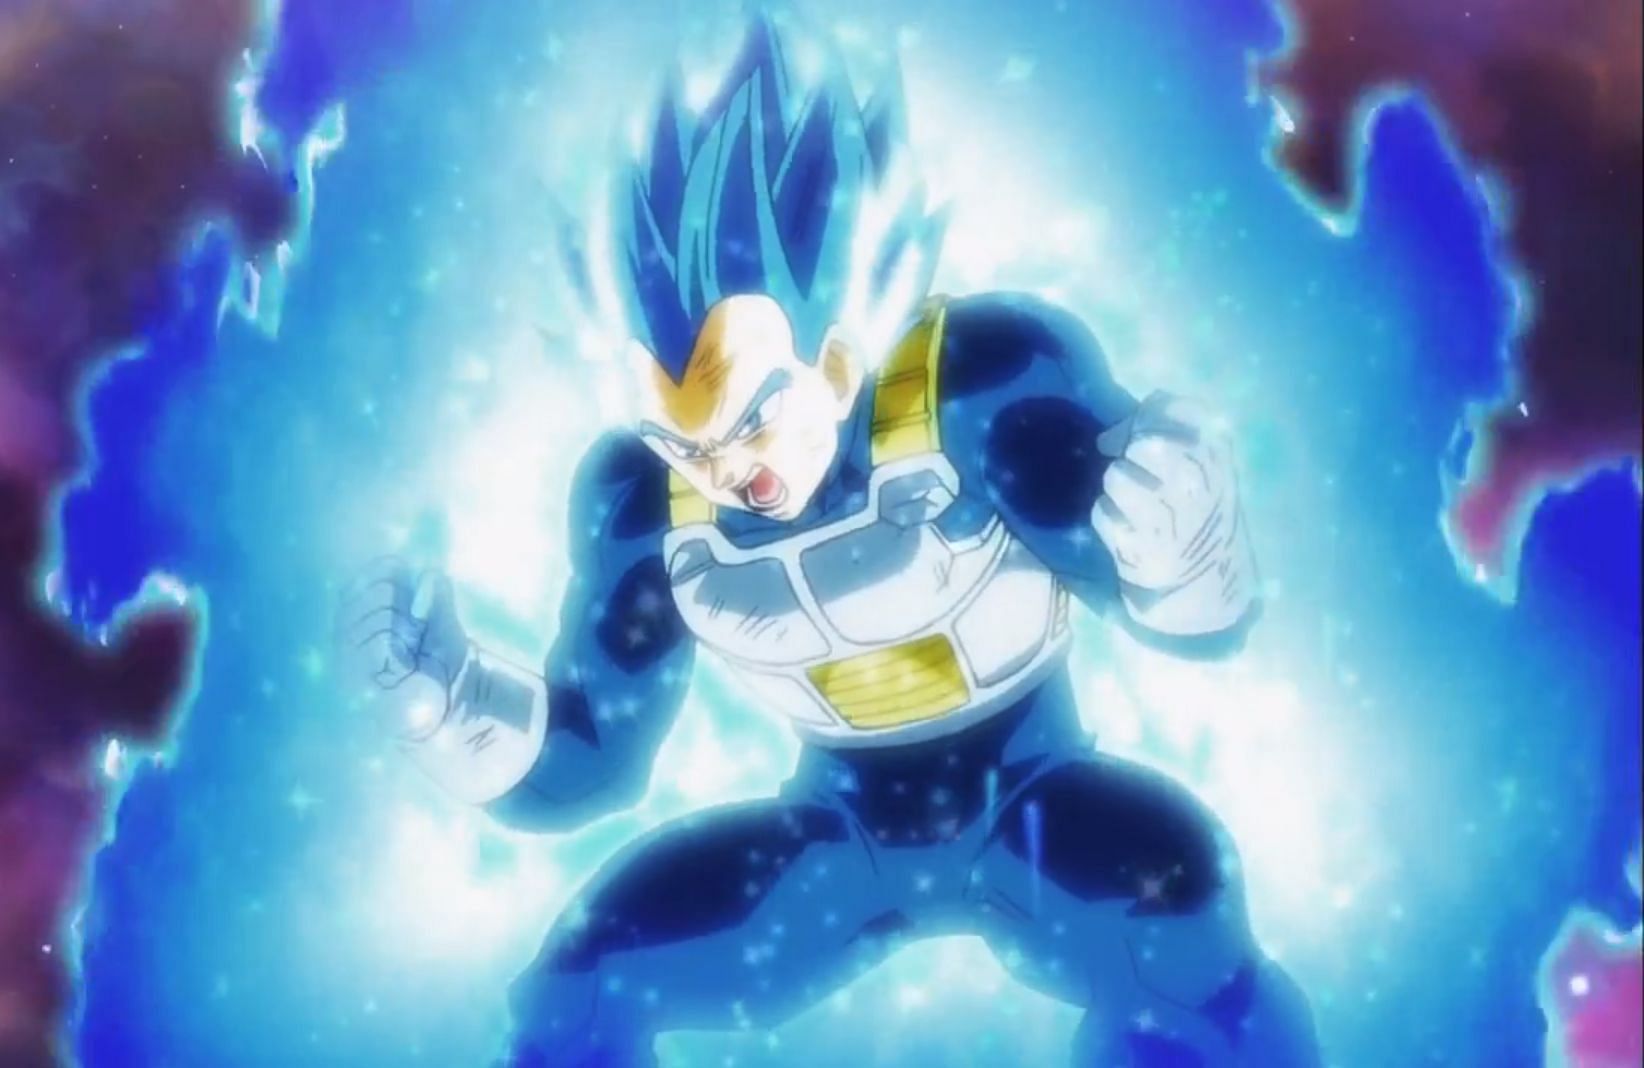 Vegeta in his Super Saiyan Blue Evolved form, as seen in the Dragon Ball Super anime (Image via Toei Animation)